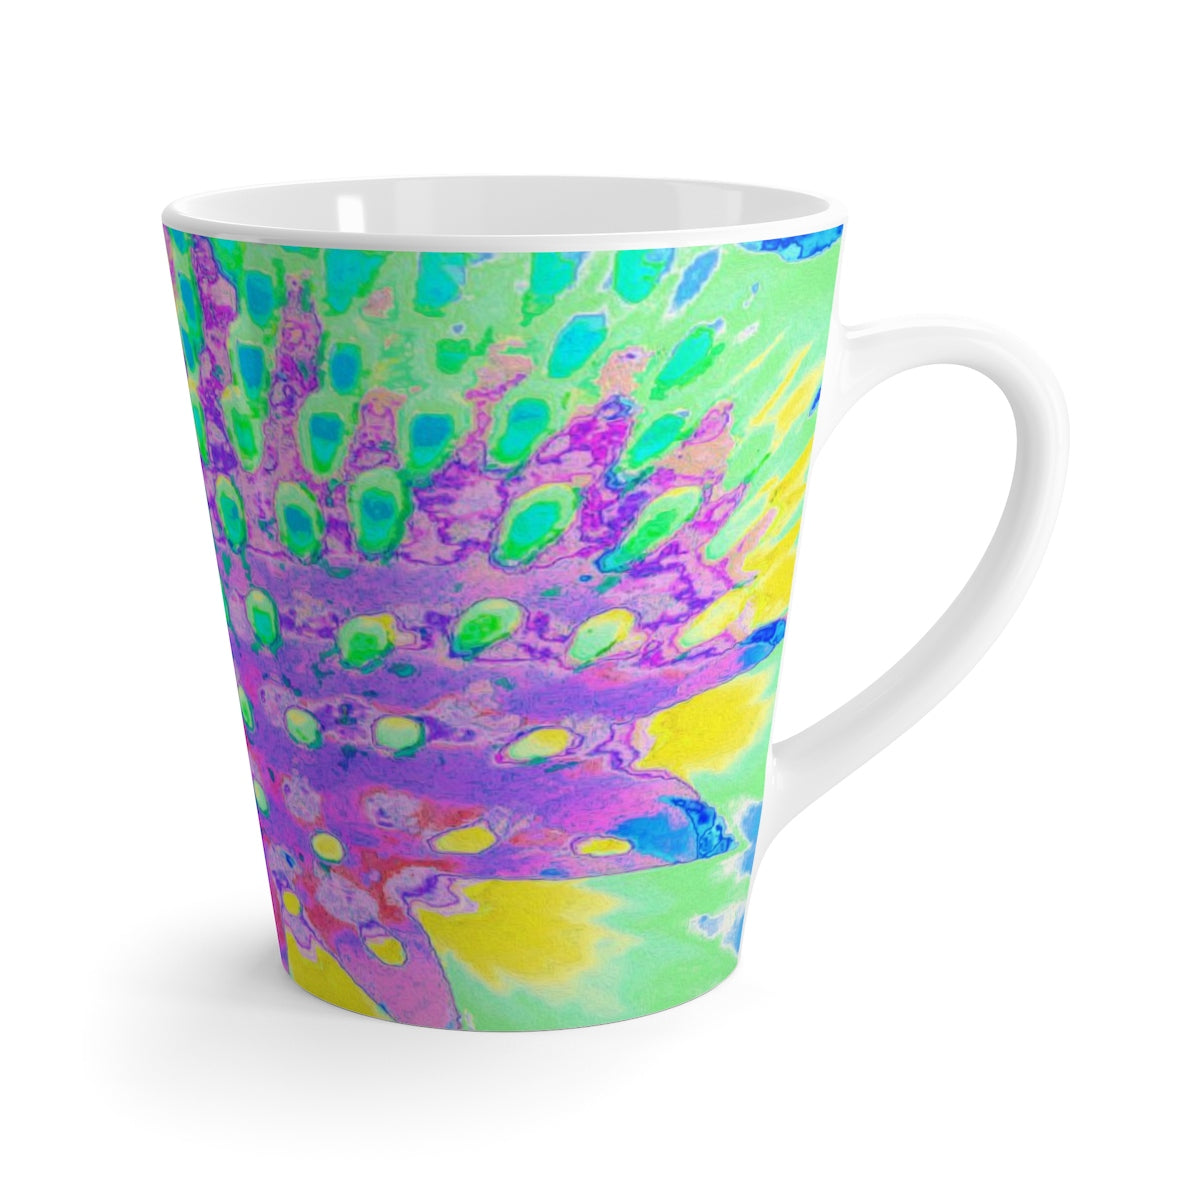 Latte mug, Turquoise Blue and Purple Abstract Coneflower